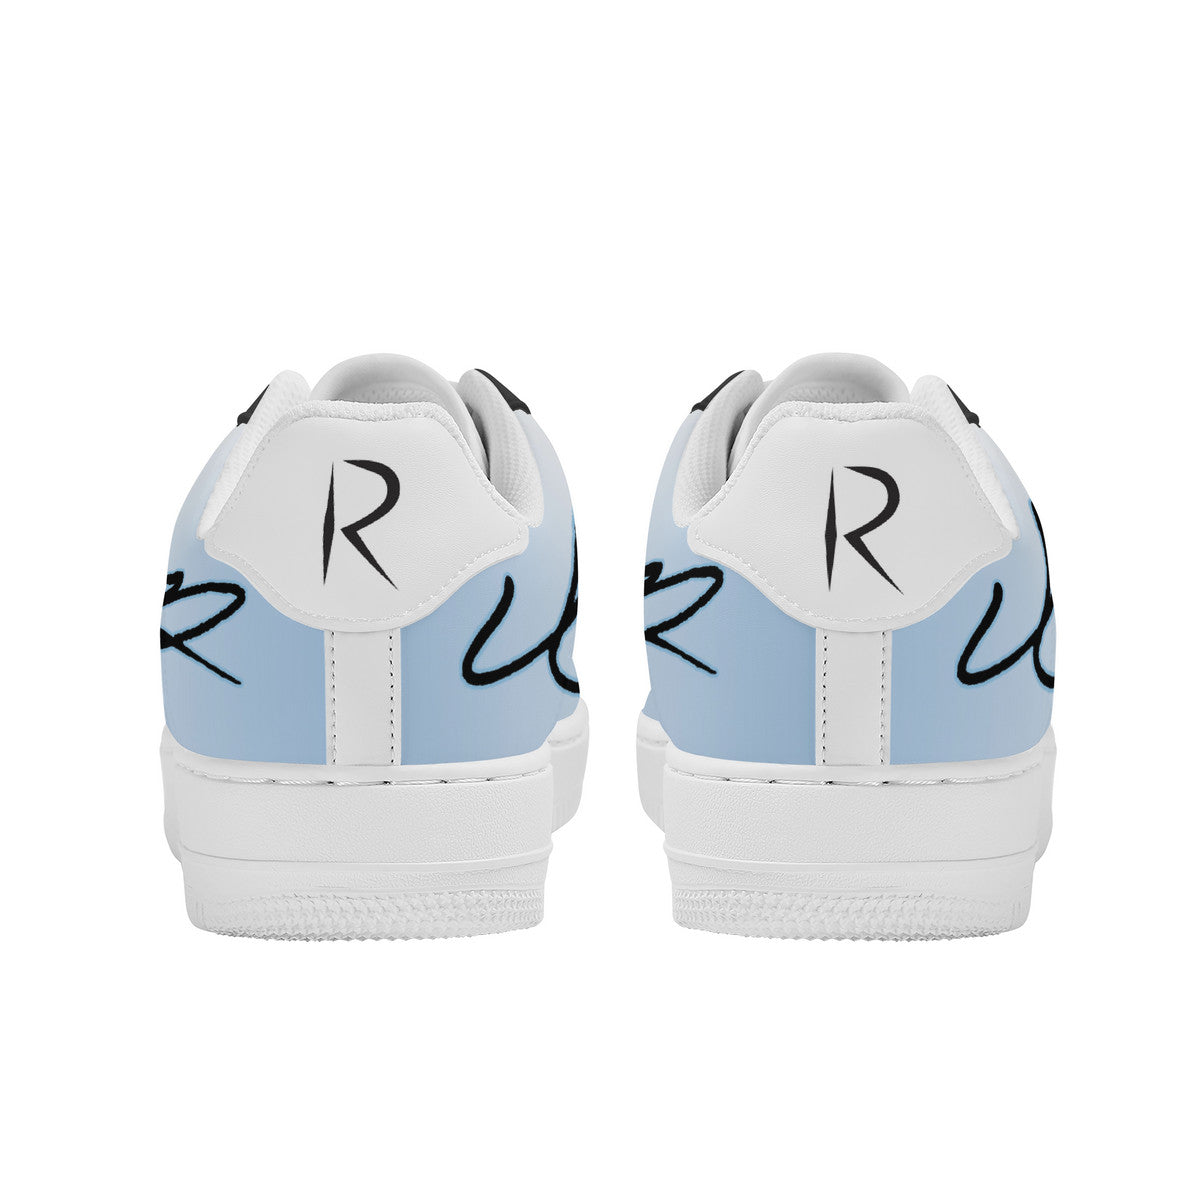 Cool shoes by Roey S | Low Top Customized | Shoe Zero